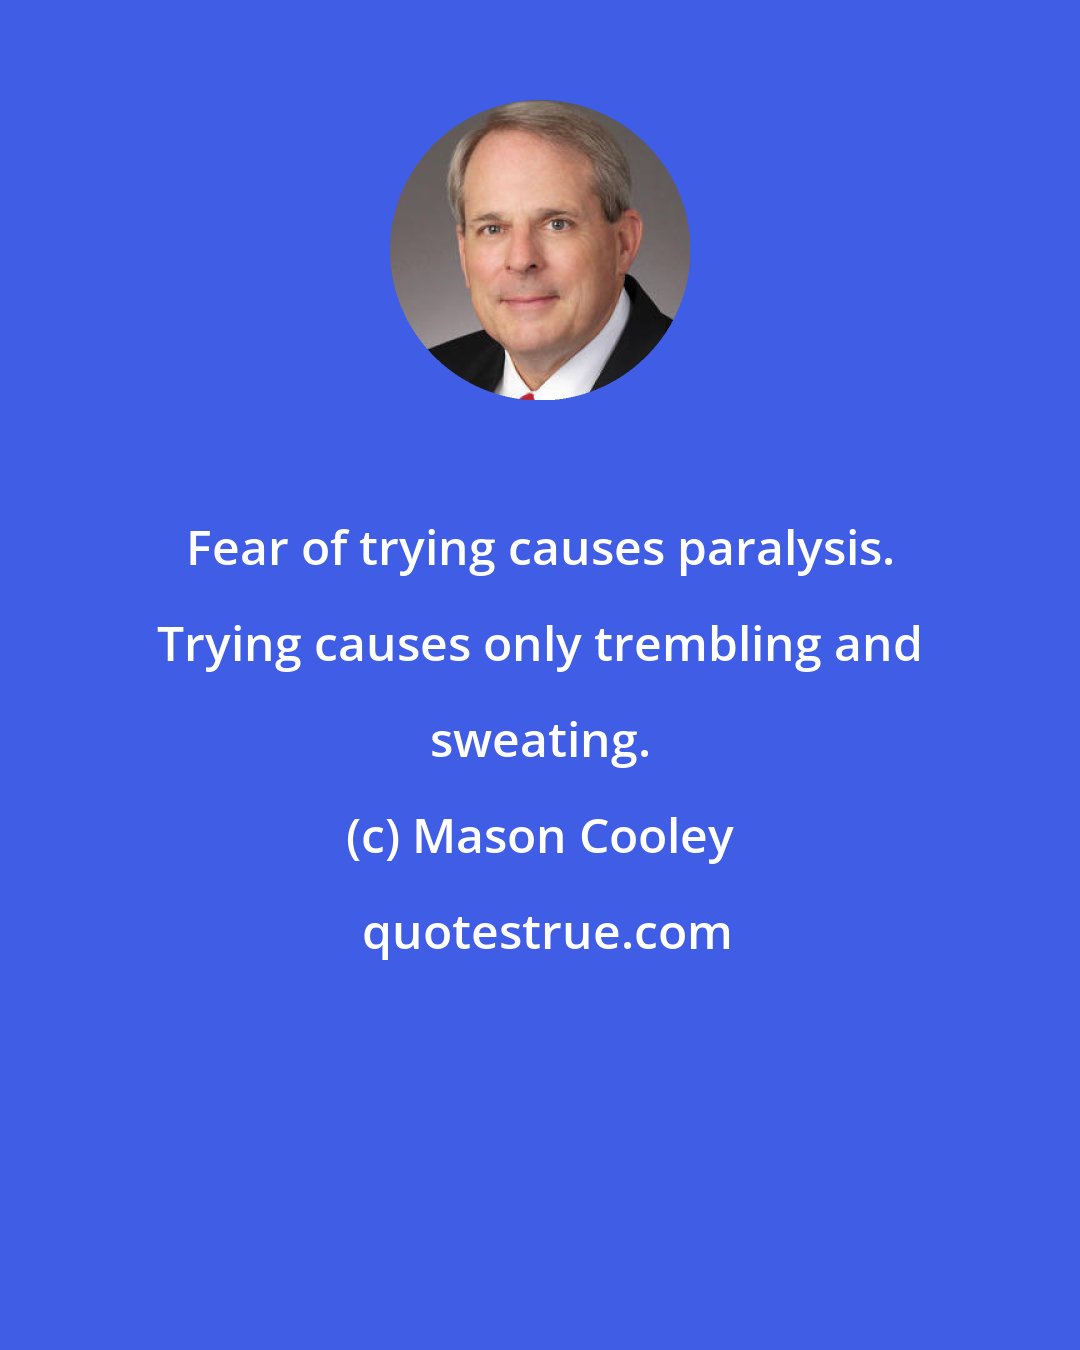 Mason Cooley: Fear of trying causes paralysis. Trying causes only trembling and sweating.